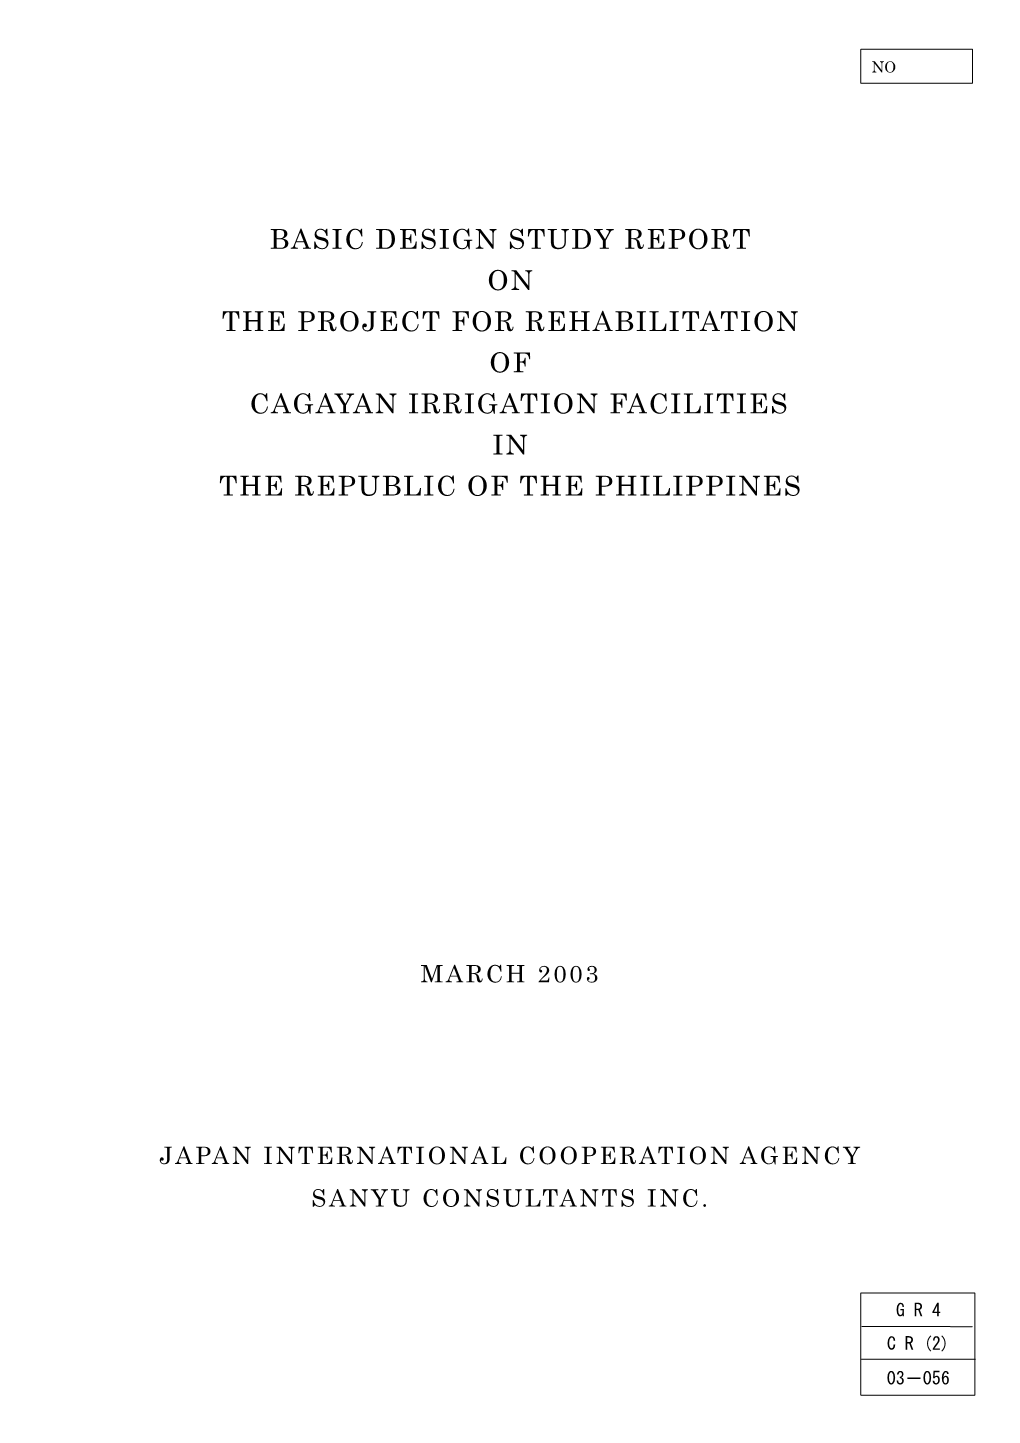 Basic Design Study Report on the Project for Rehabilitation of Cagayan Irrigation Facilities in the Republic of the Philippines